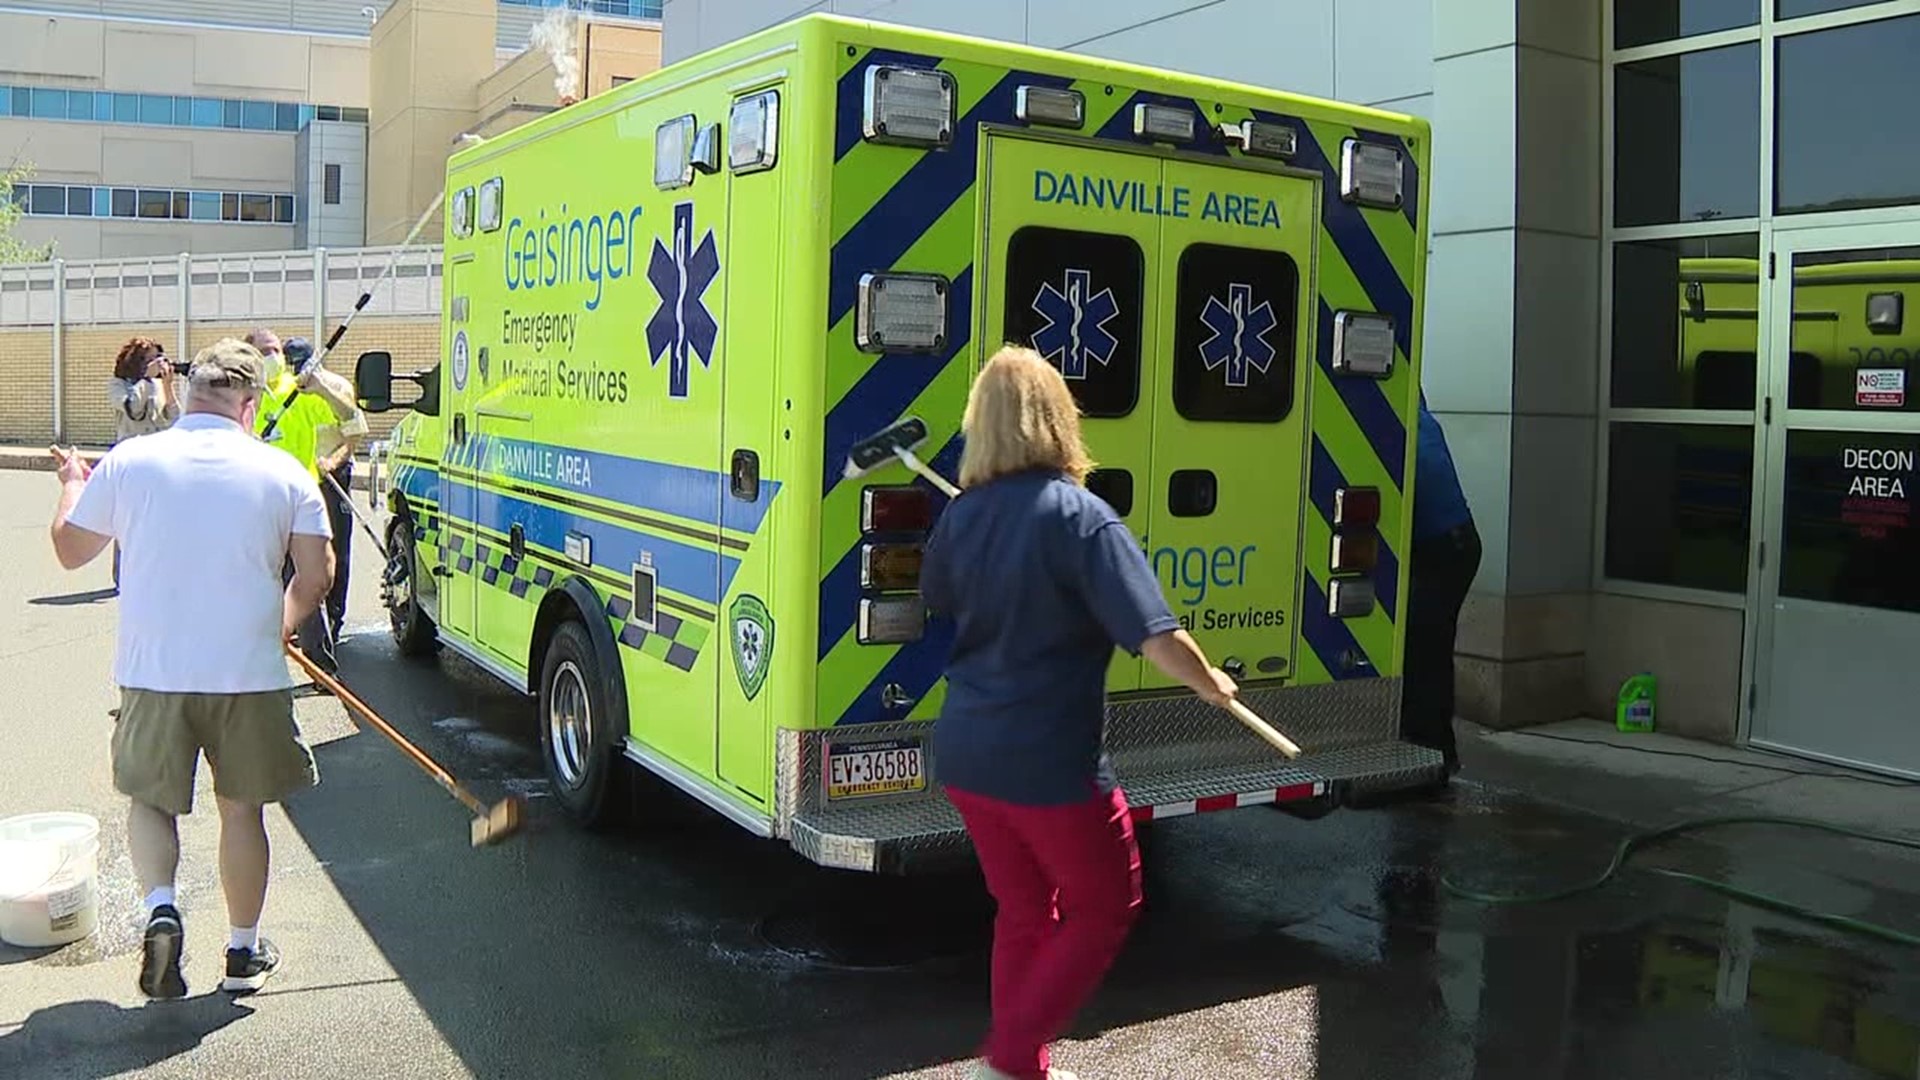 Geisinger took note of EMS Week by providing free ambulance washes outside the medical center in Montour County.